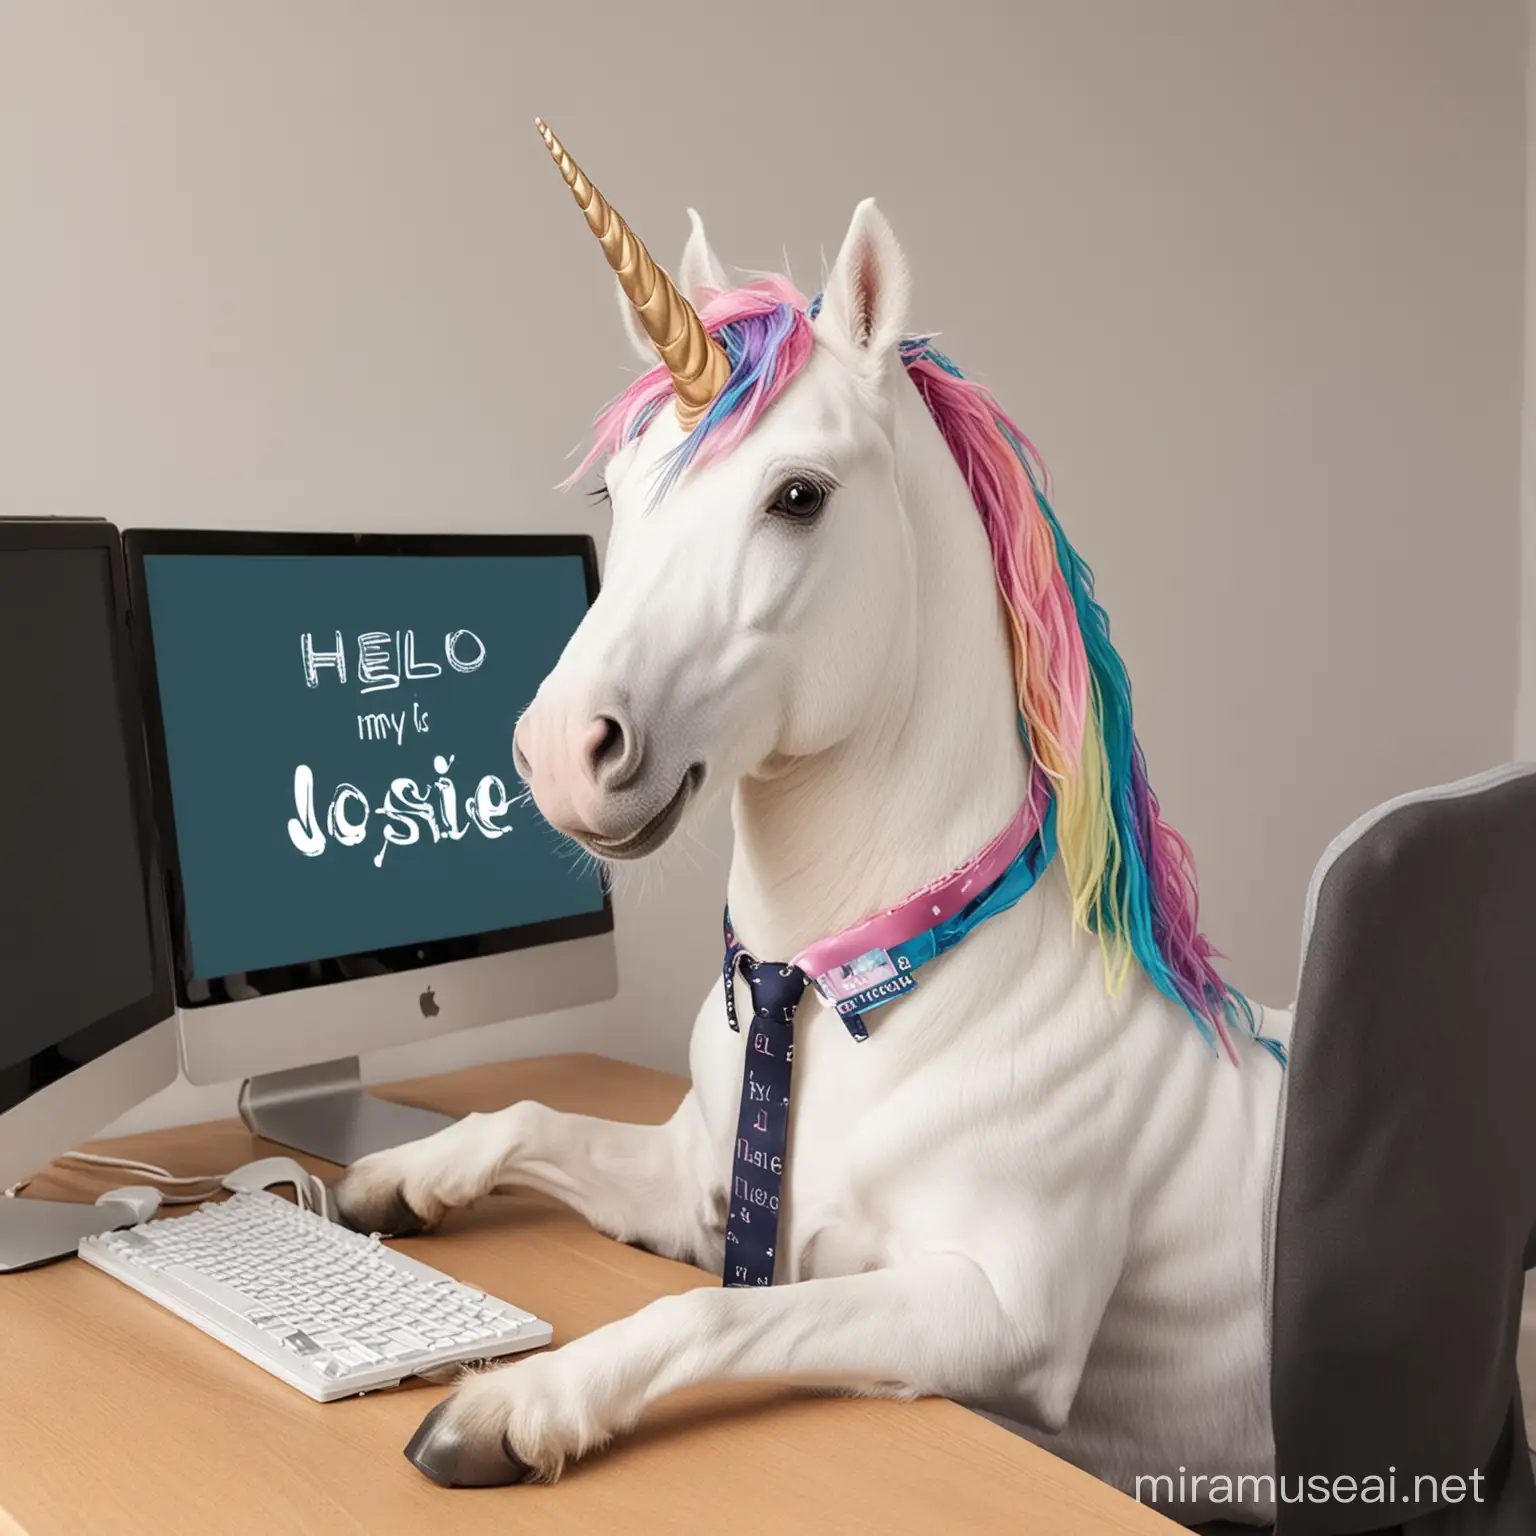 unicorn wearing tie working on computer at desk with name tag that says "Hello my name is josie